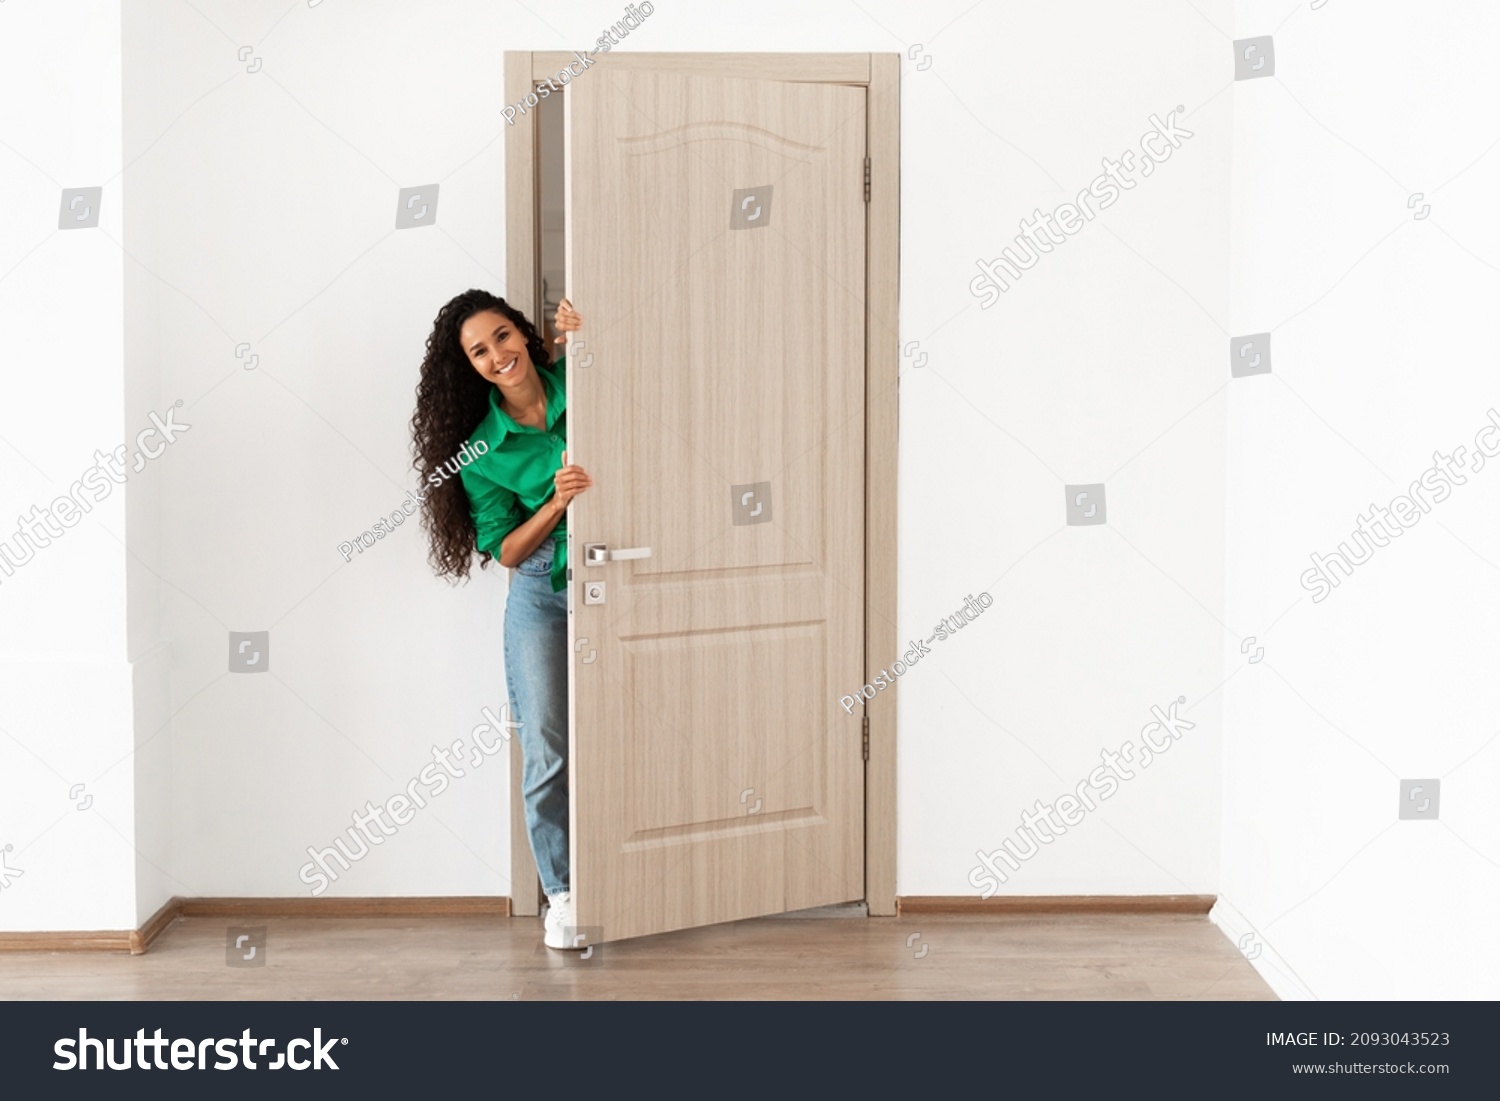 Portrait of cheerful young woman standing in doorway of modern apartment, millennial female homeowner holding slightly open ajar door looking out and smiling, greeting visitor, full body length #2093043523